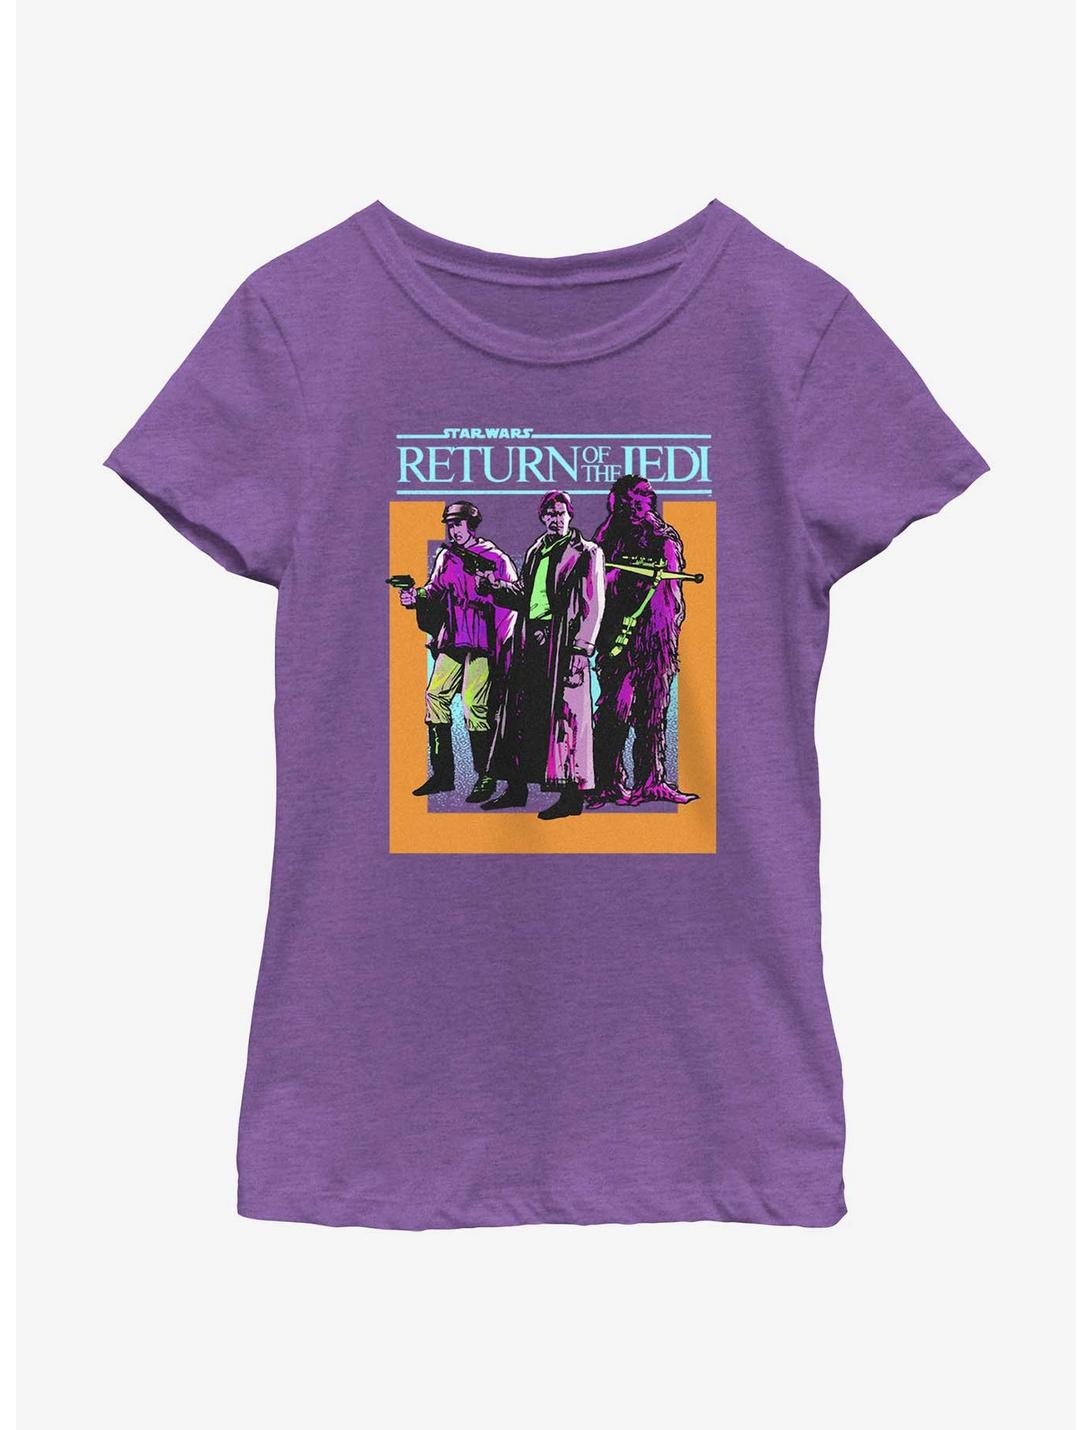 Star Wars Return Of The Jedi Comic Cover Youth Girls T-Shirt, PURPLE BERRY, hi-res